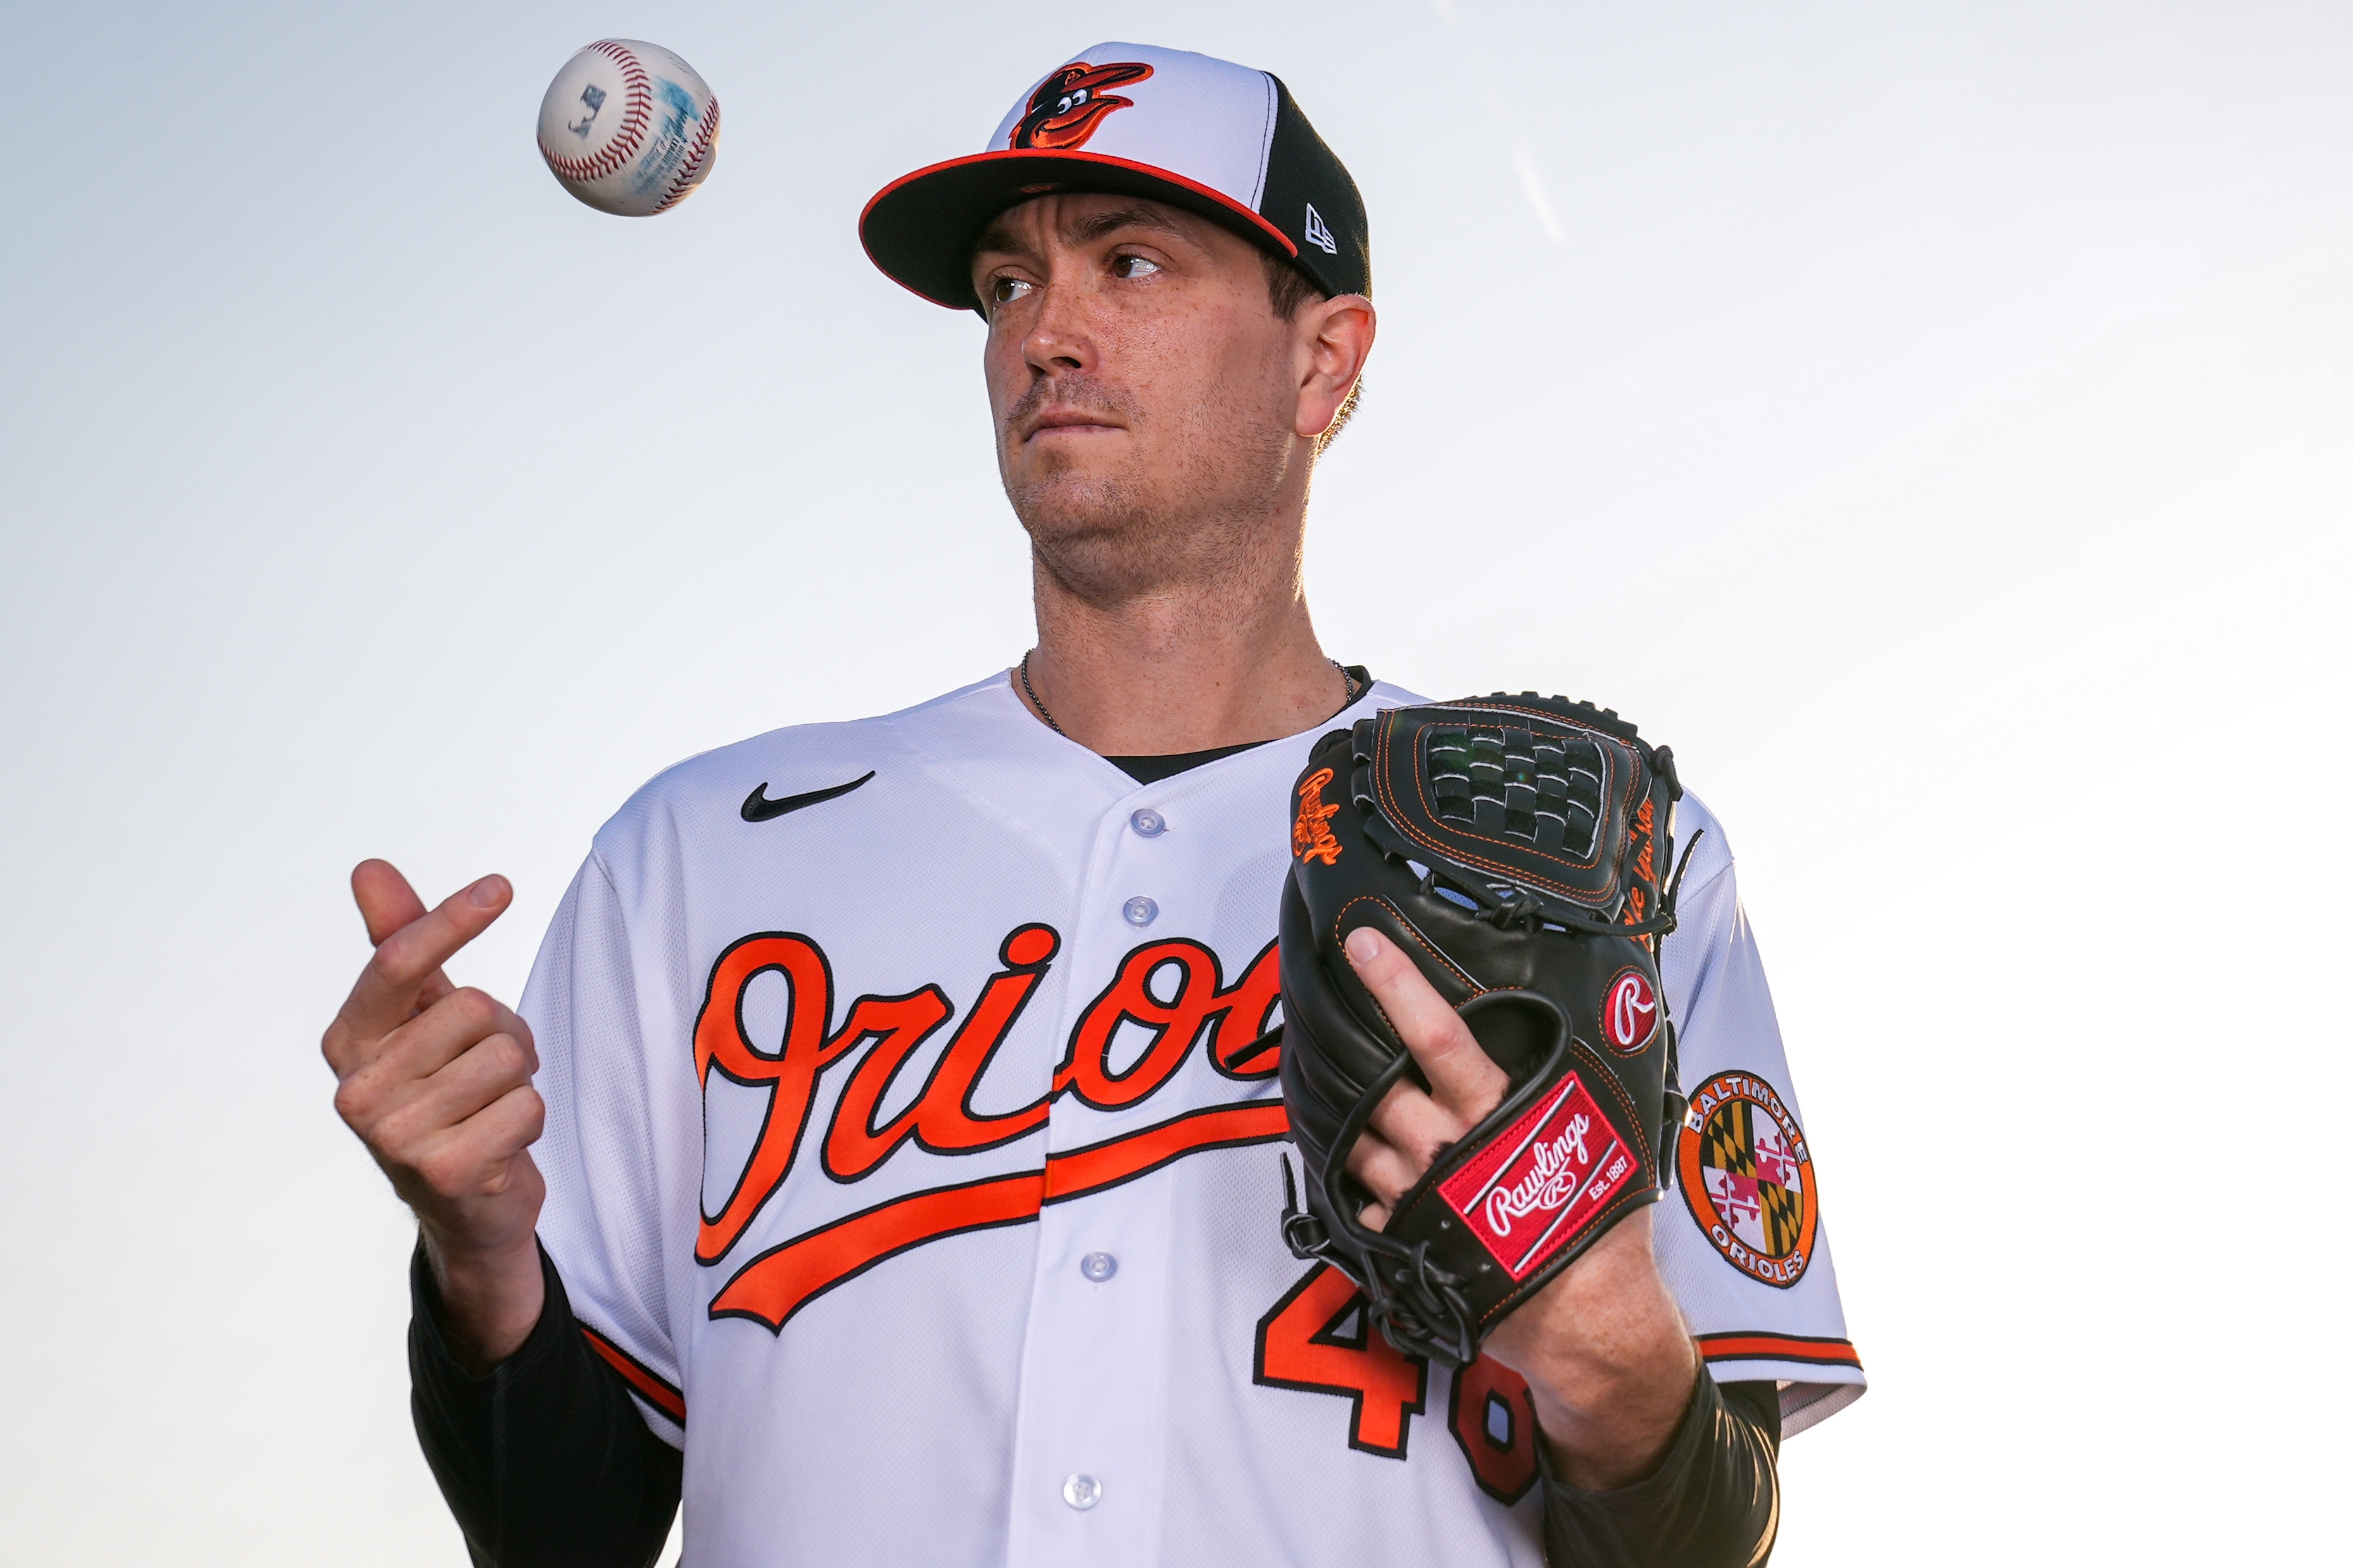 Orioles' J.J. Hardy: 'Nothing official we have to wait